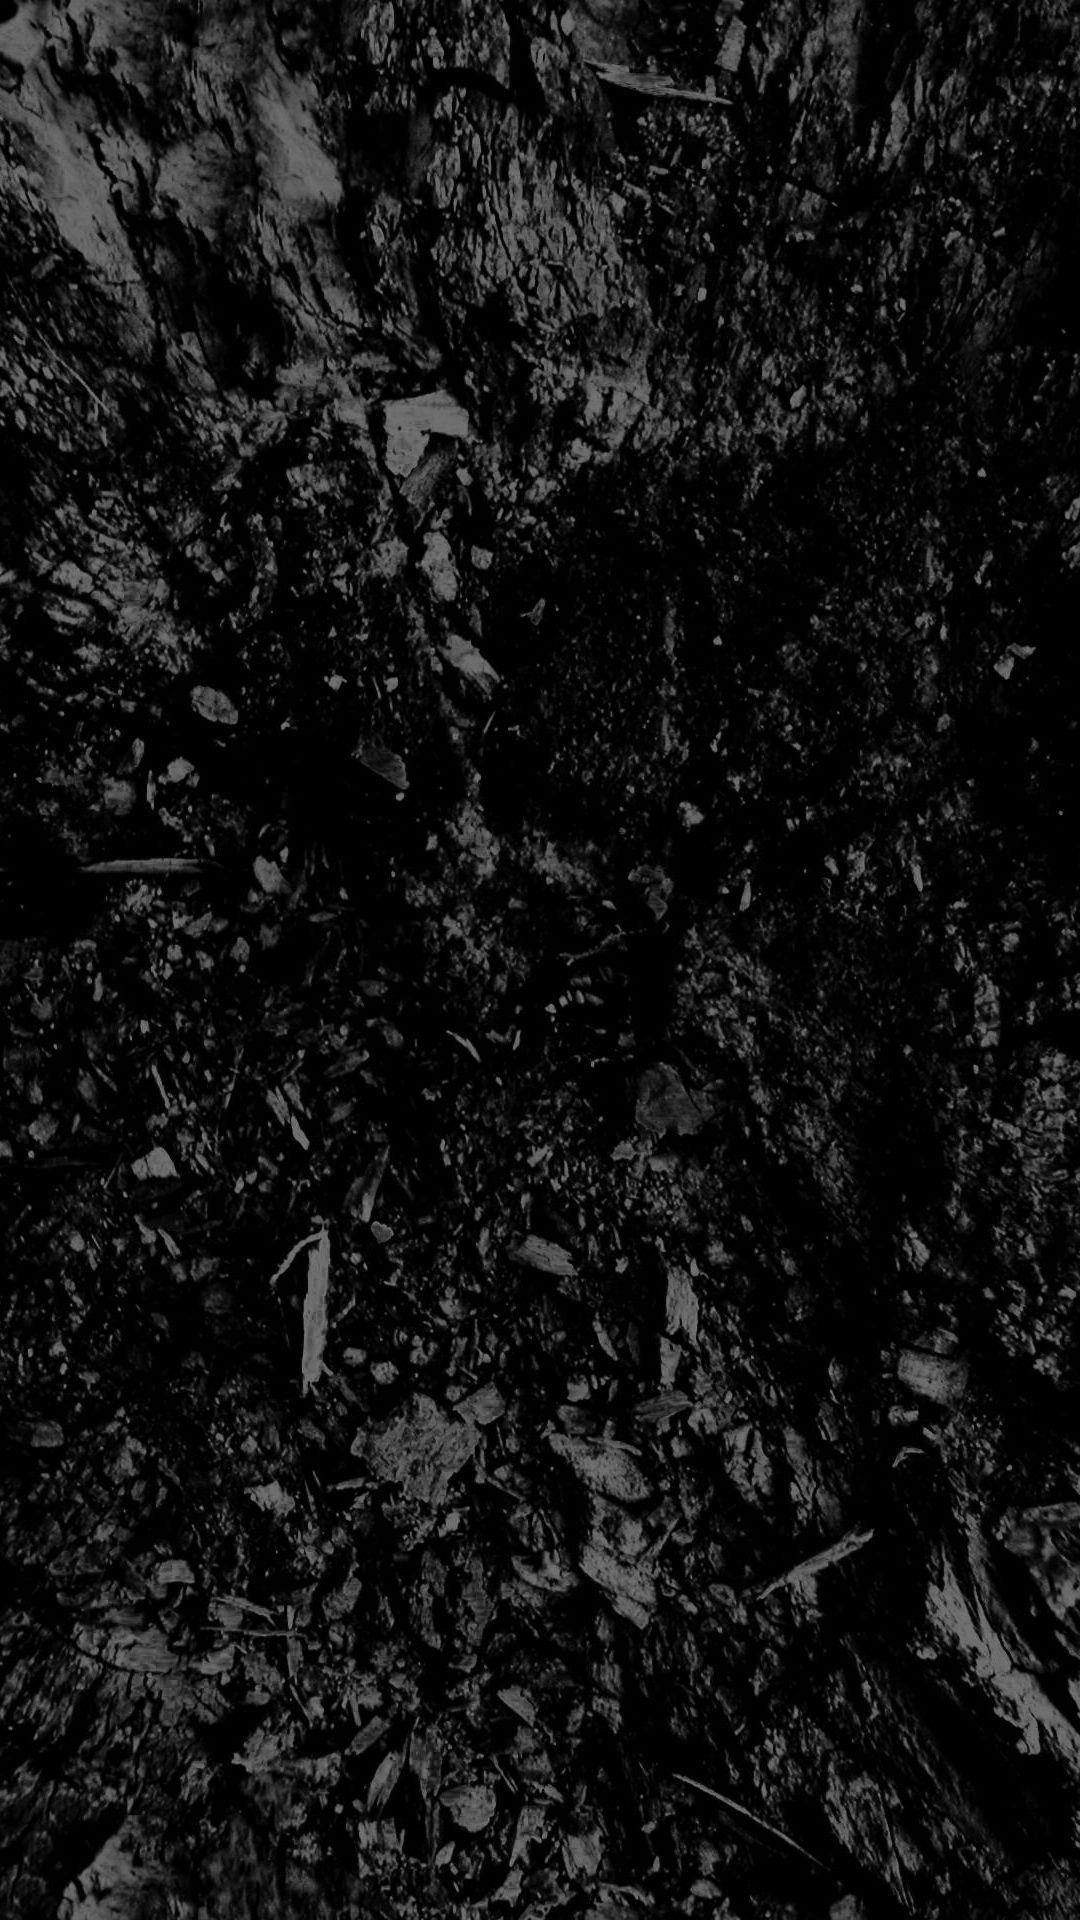 Download wallpaper 1080x1920 dark, black and white, abstract, black